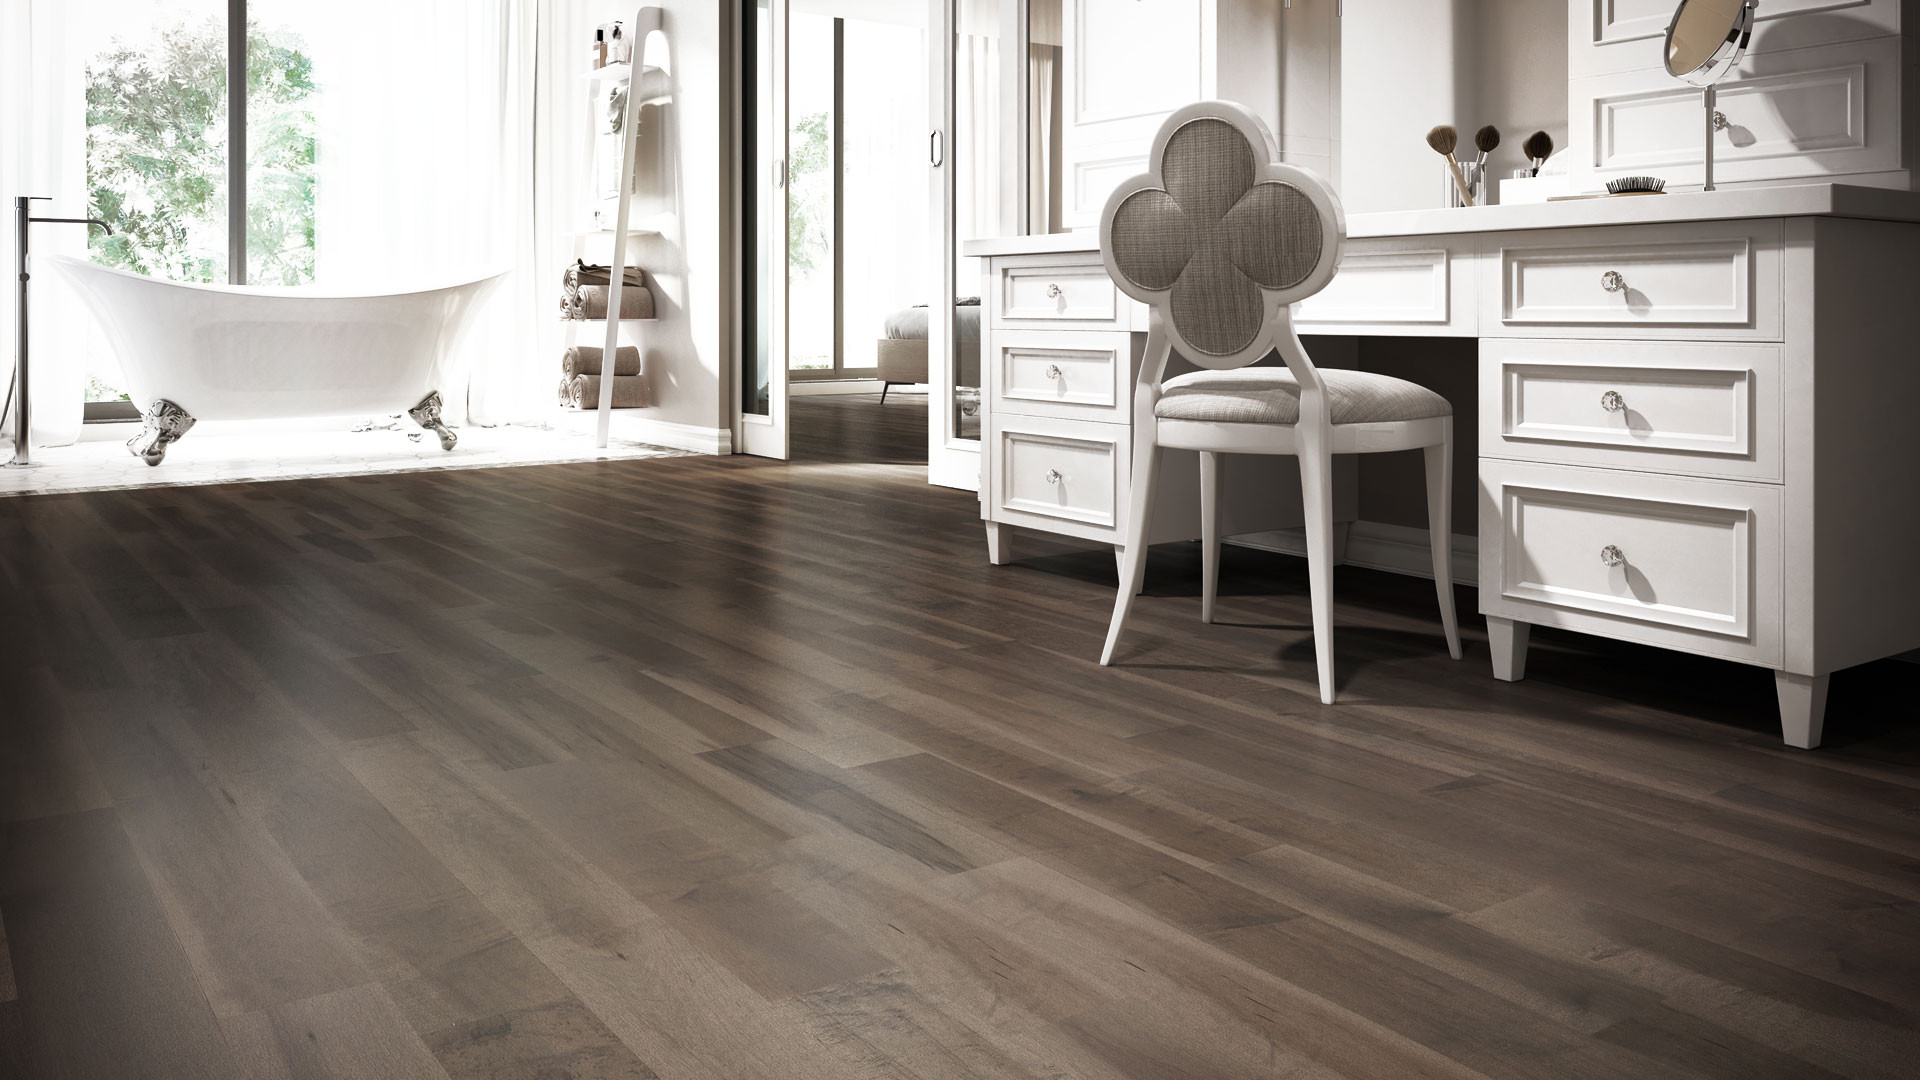 best hardwood flooring in toronto of 4 latest hardwood flooring trends lauzon flooring intended for learn more about our pure genius by reading our blog post the smartest hardwood flooring weve ever seen